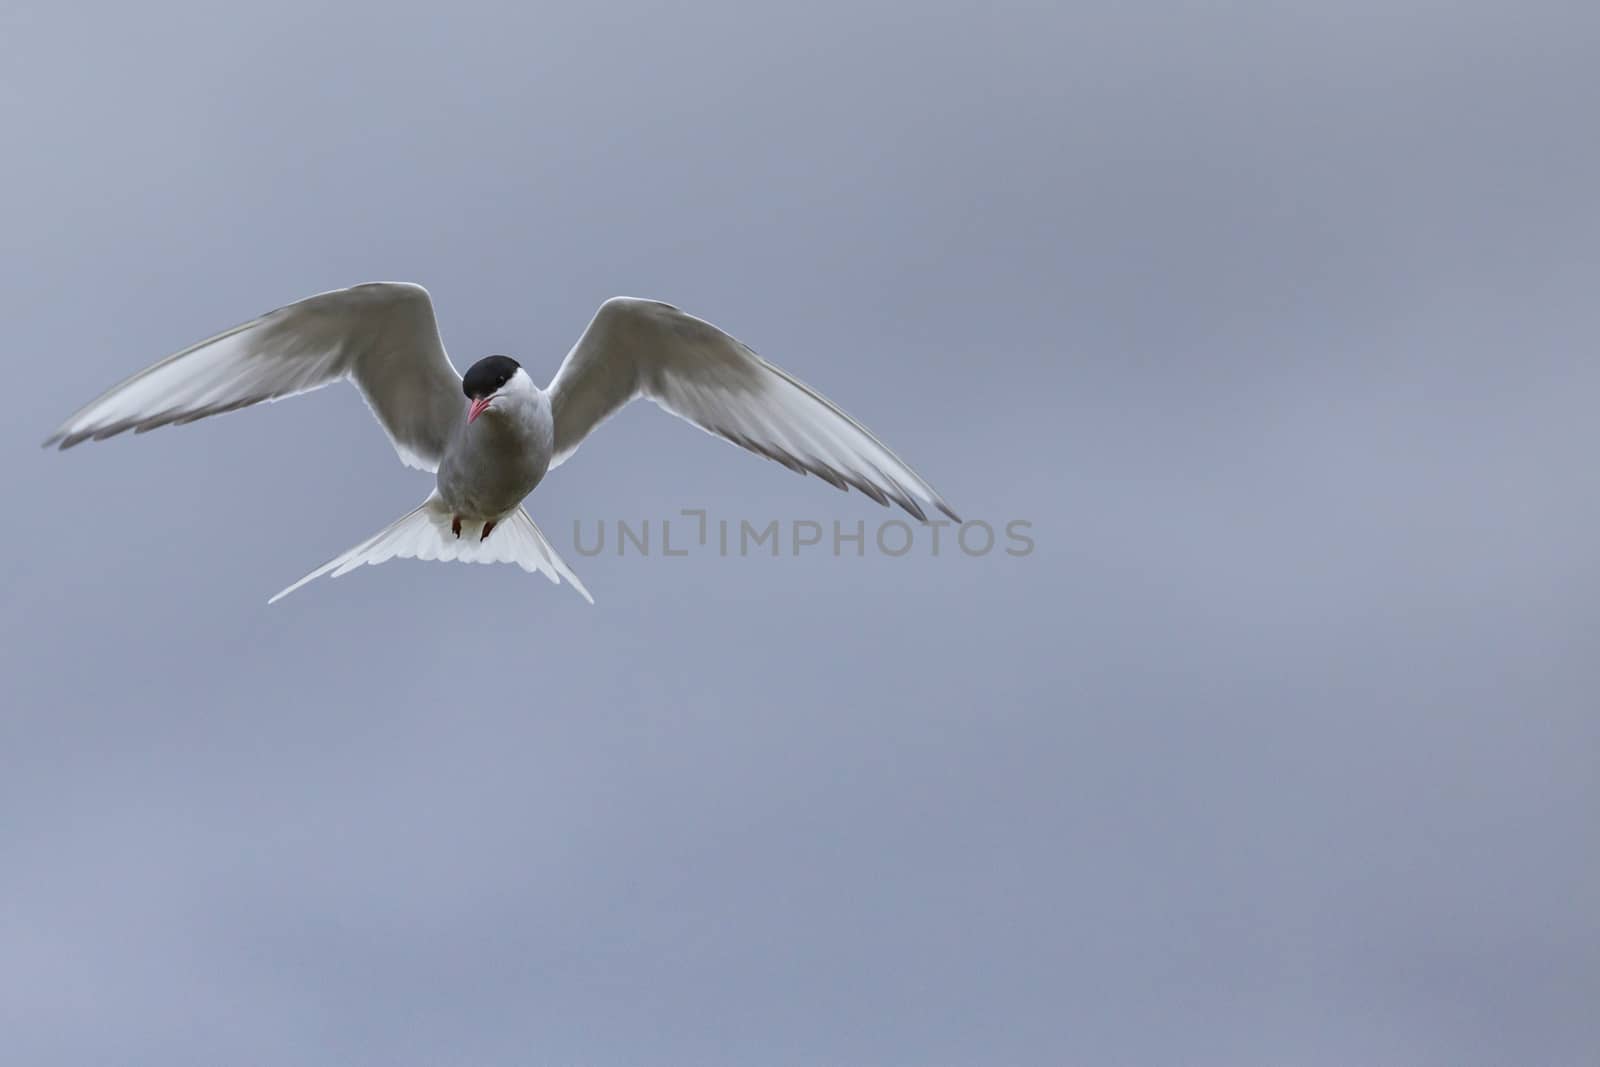 Whilst their mates incubate their eggs, these Arctic Terns head  by mariusz_prusaczyk